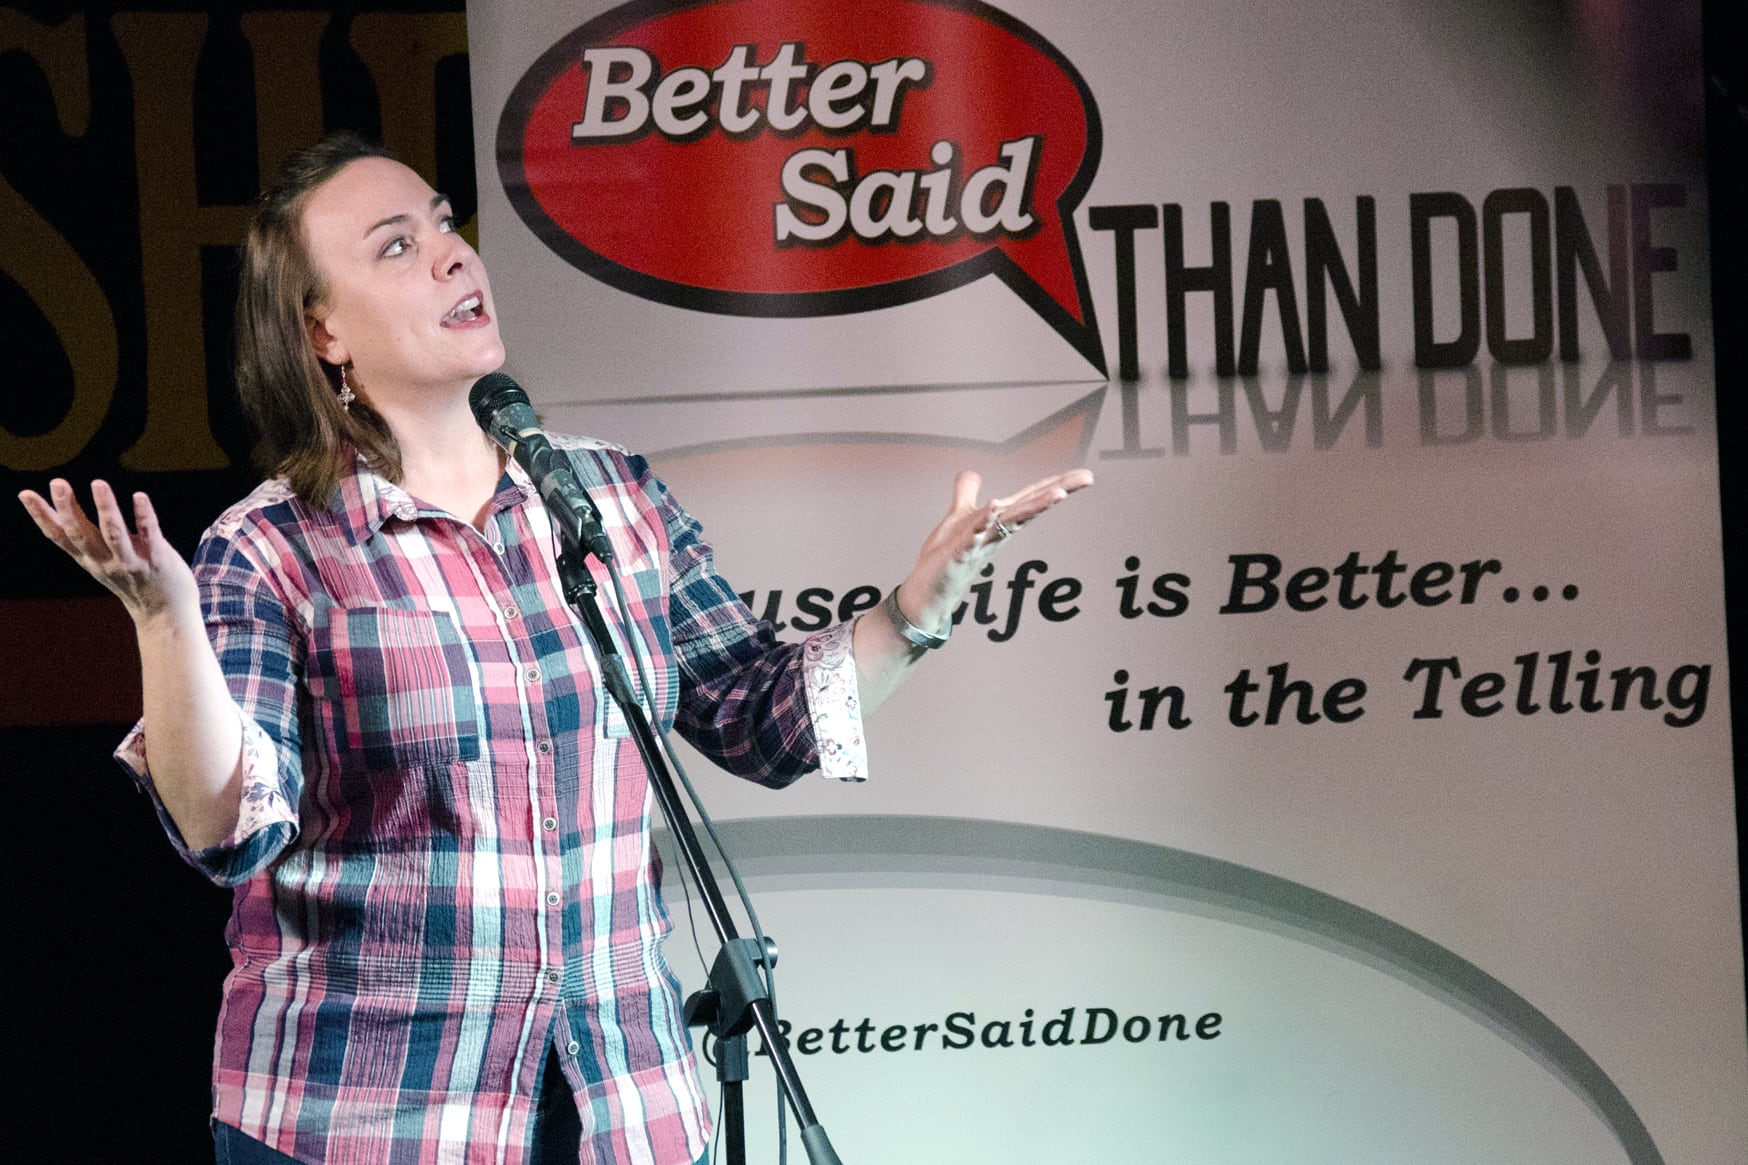 Jessica Robinson, founder of Better Said Than Done. Photo courtesy of Better Said Than Done.